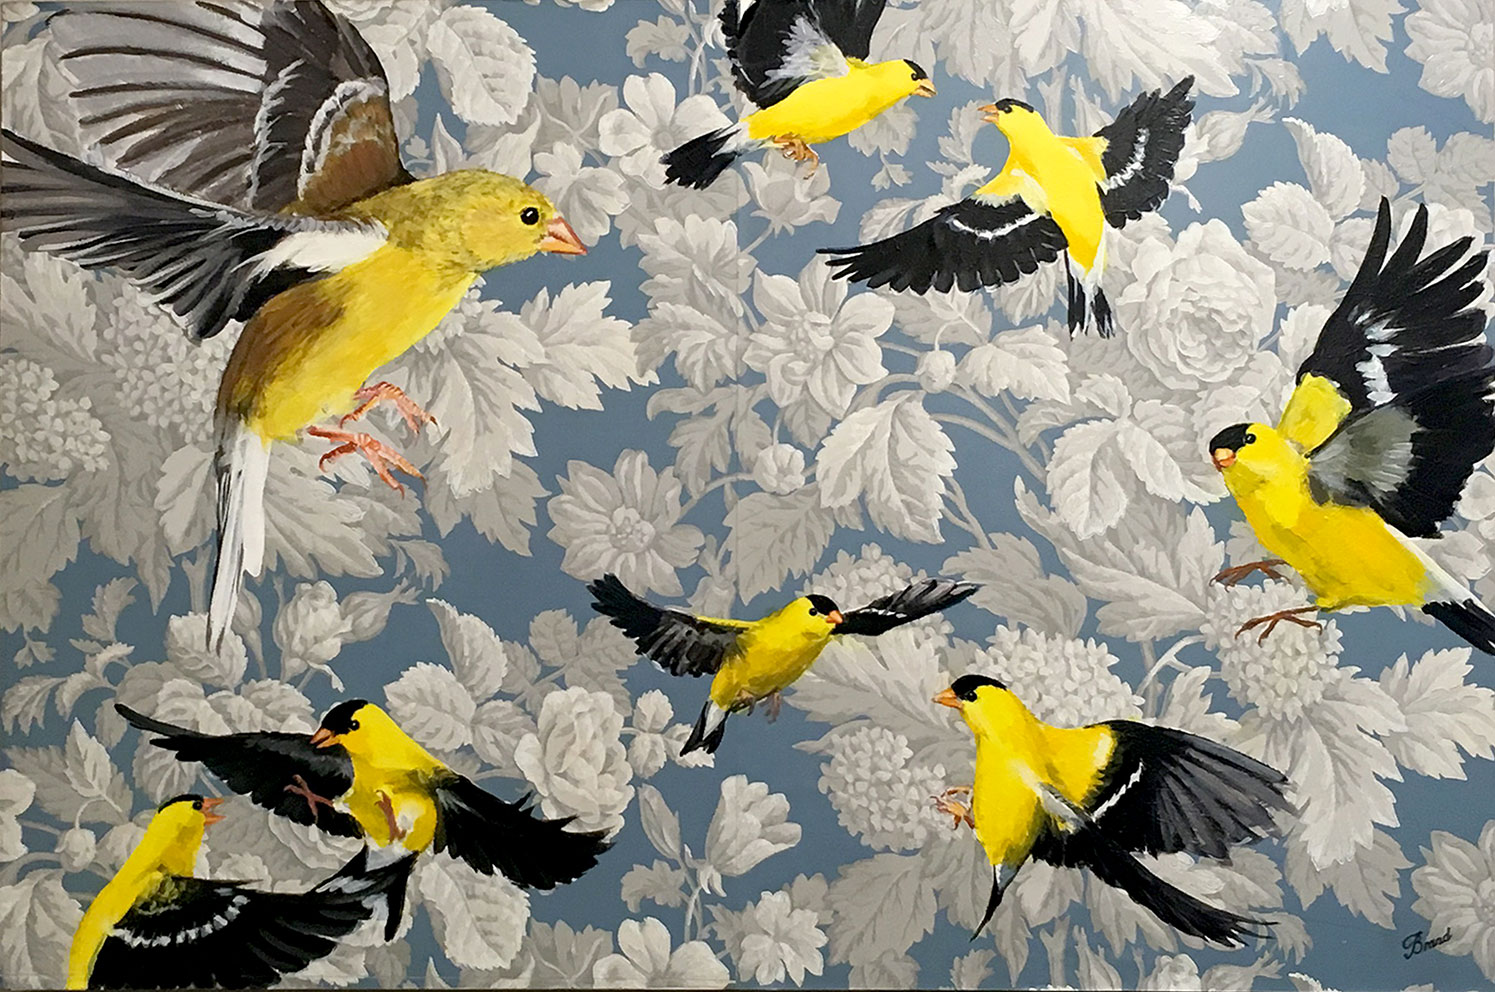 Charmed, Acrylic painting of Goldfinches on Wallpaper mounted on panel, 24 x 36 inches, 2017, Private Collection